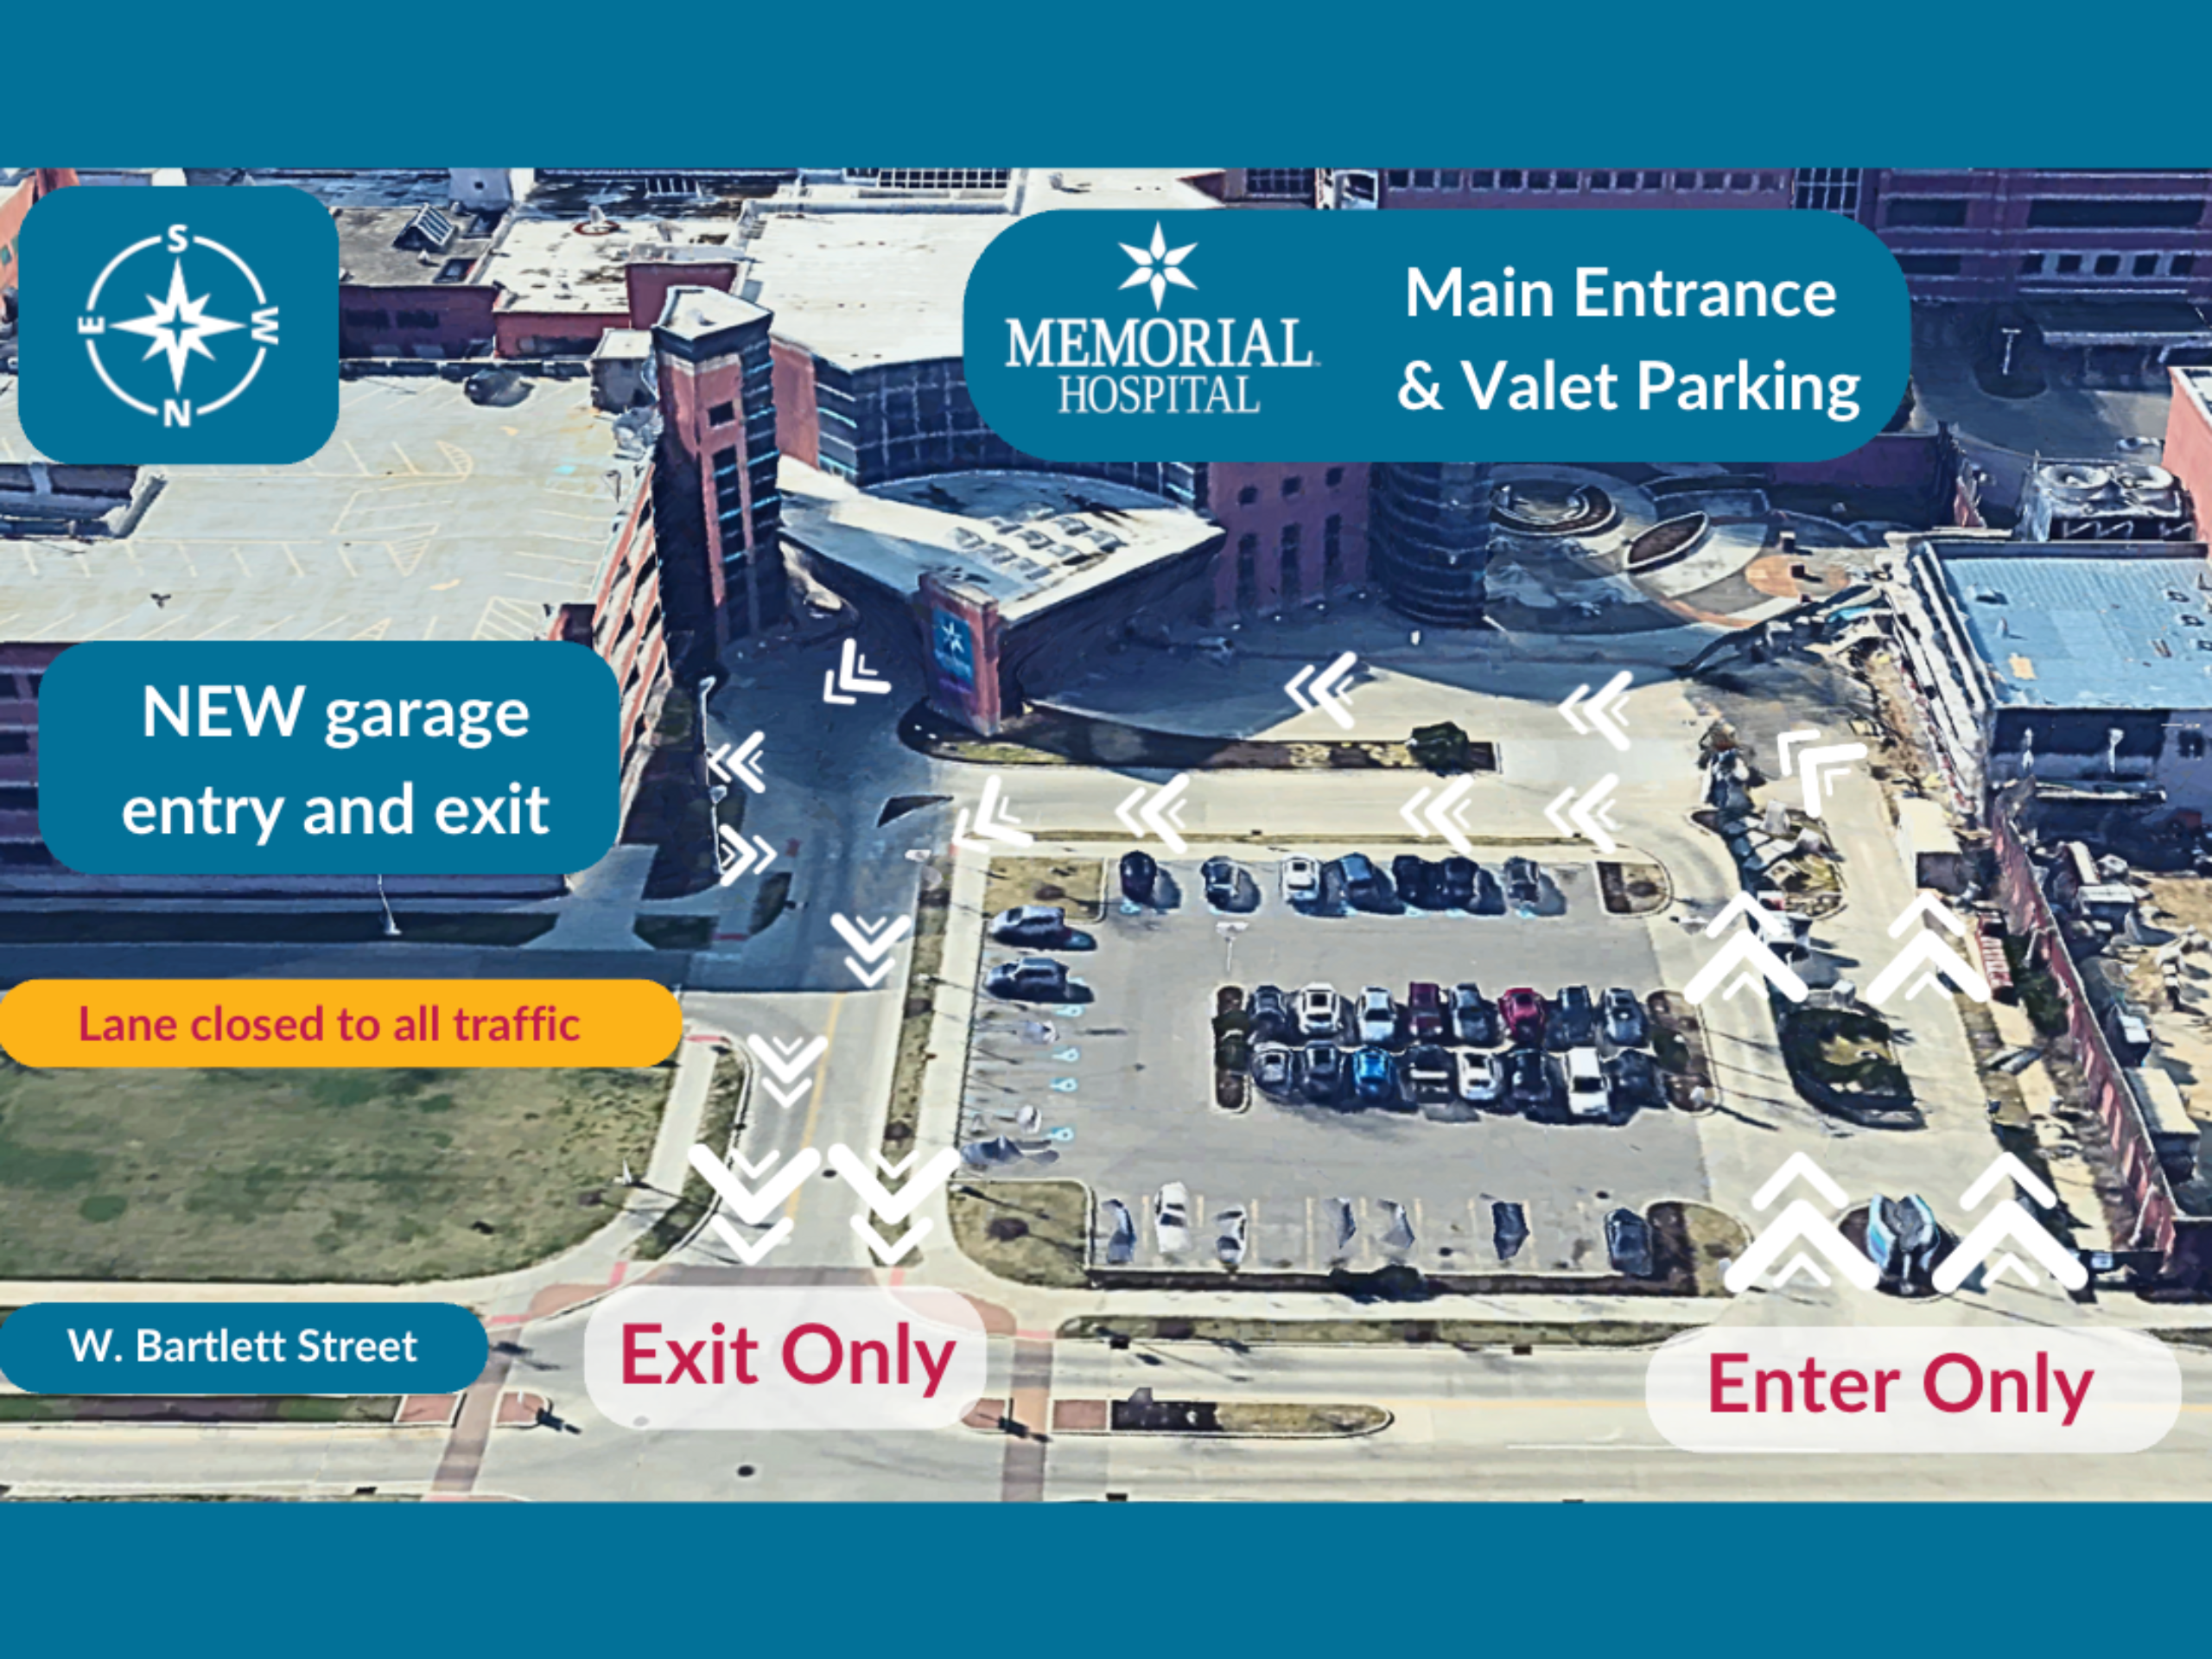 Photo of the Memorial Hospital of South Bend main entrance and parking garage area with directional arrows showing new traffic flow.